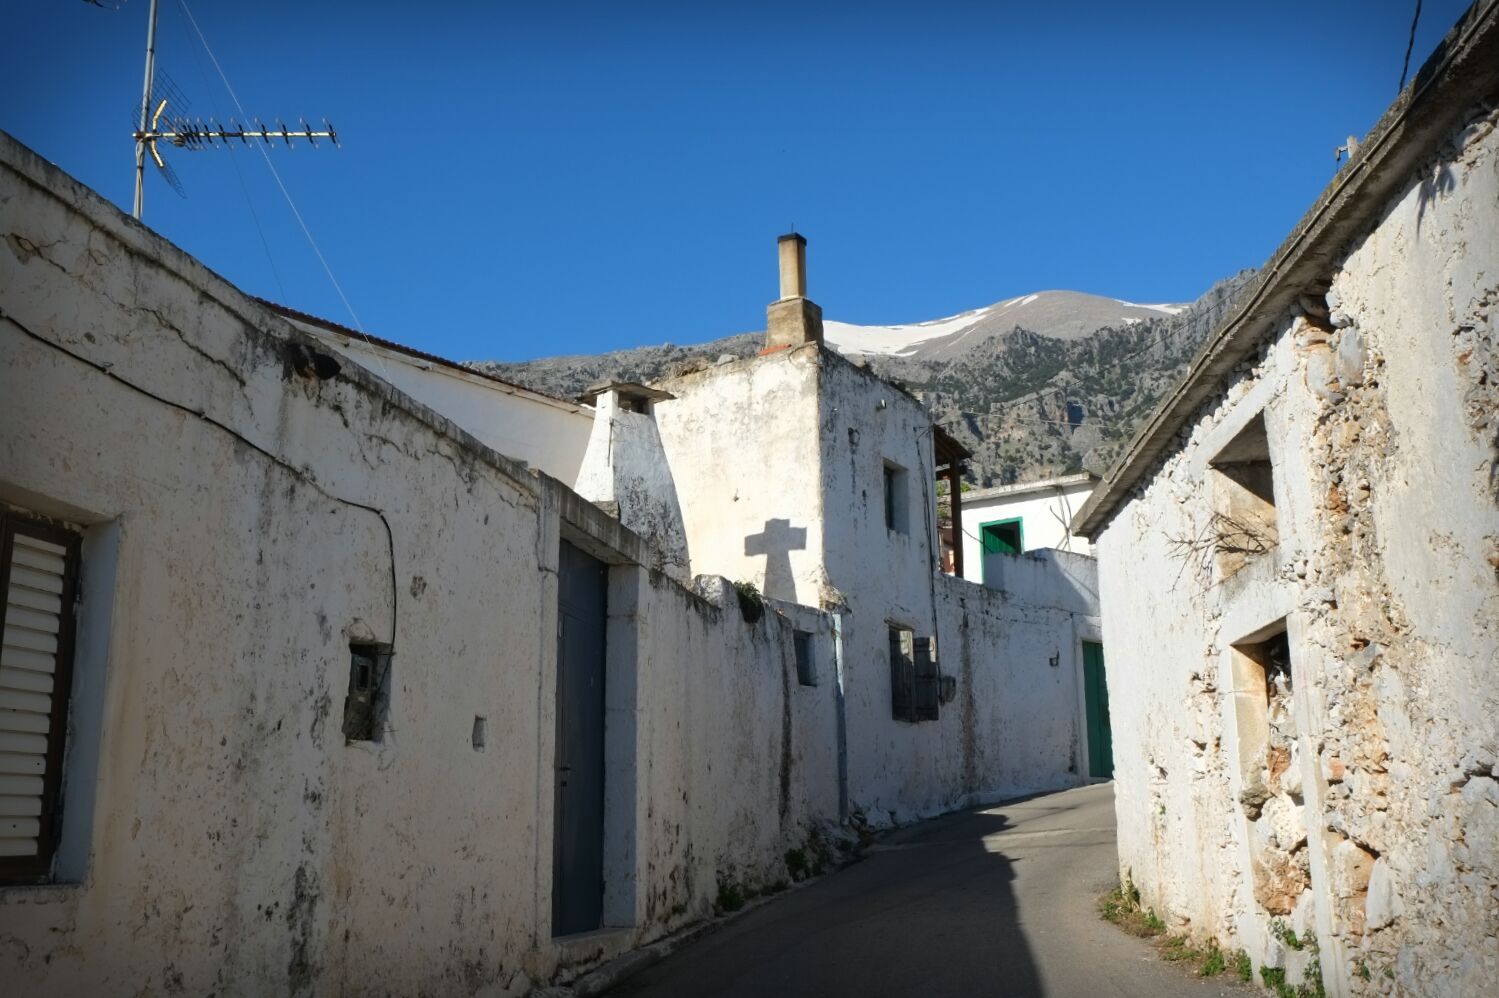 Fourfouras is a rather lovely hill village situated high on the eastern slopes of the Amari valley.